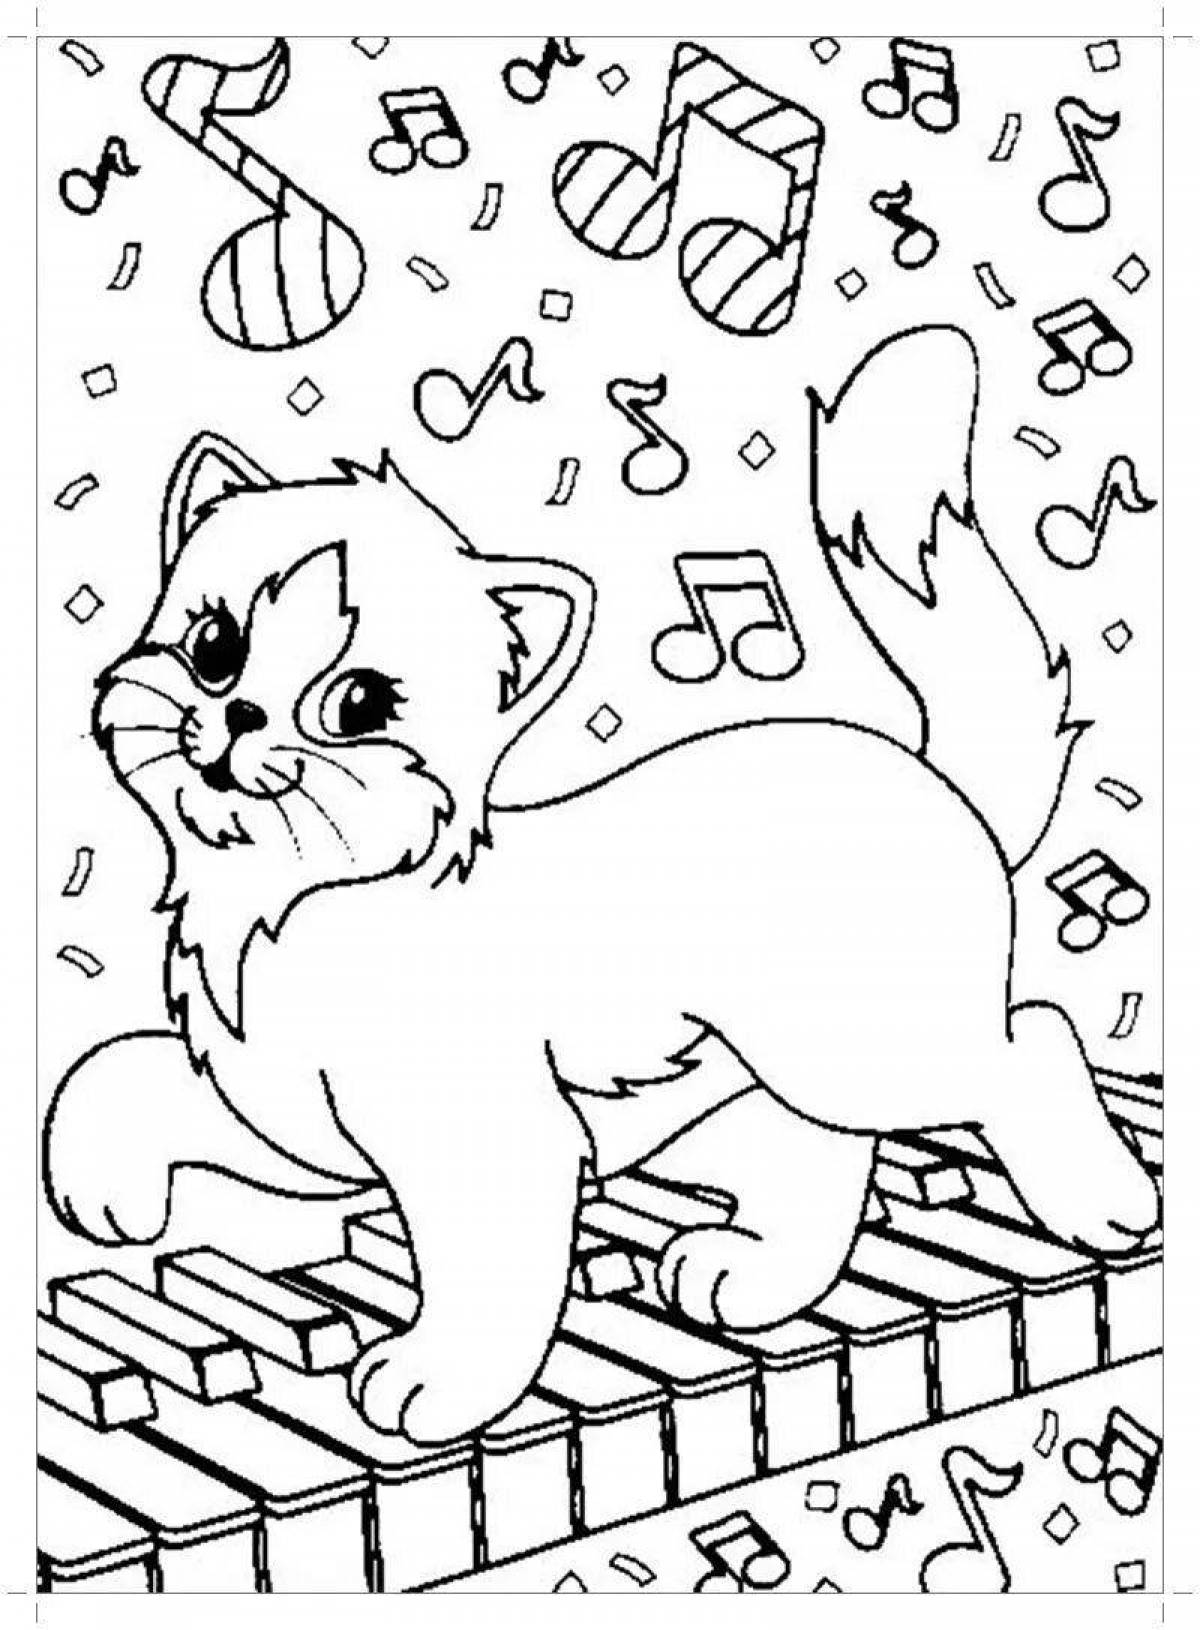 Fairytale coloring book for children 5-6 years old for girls animals